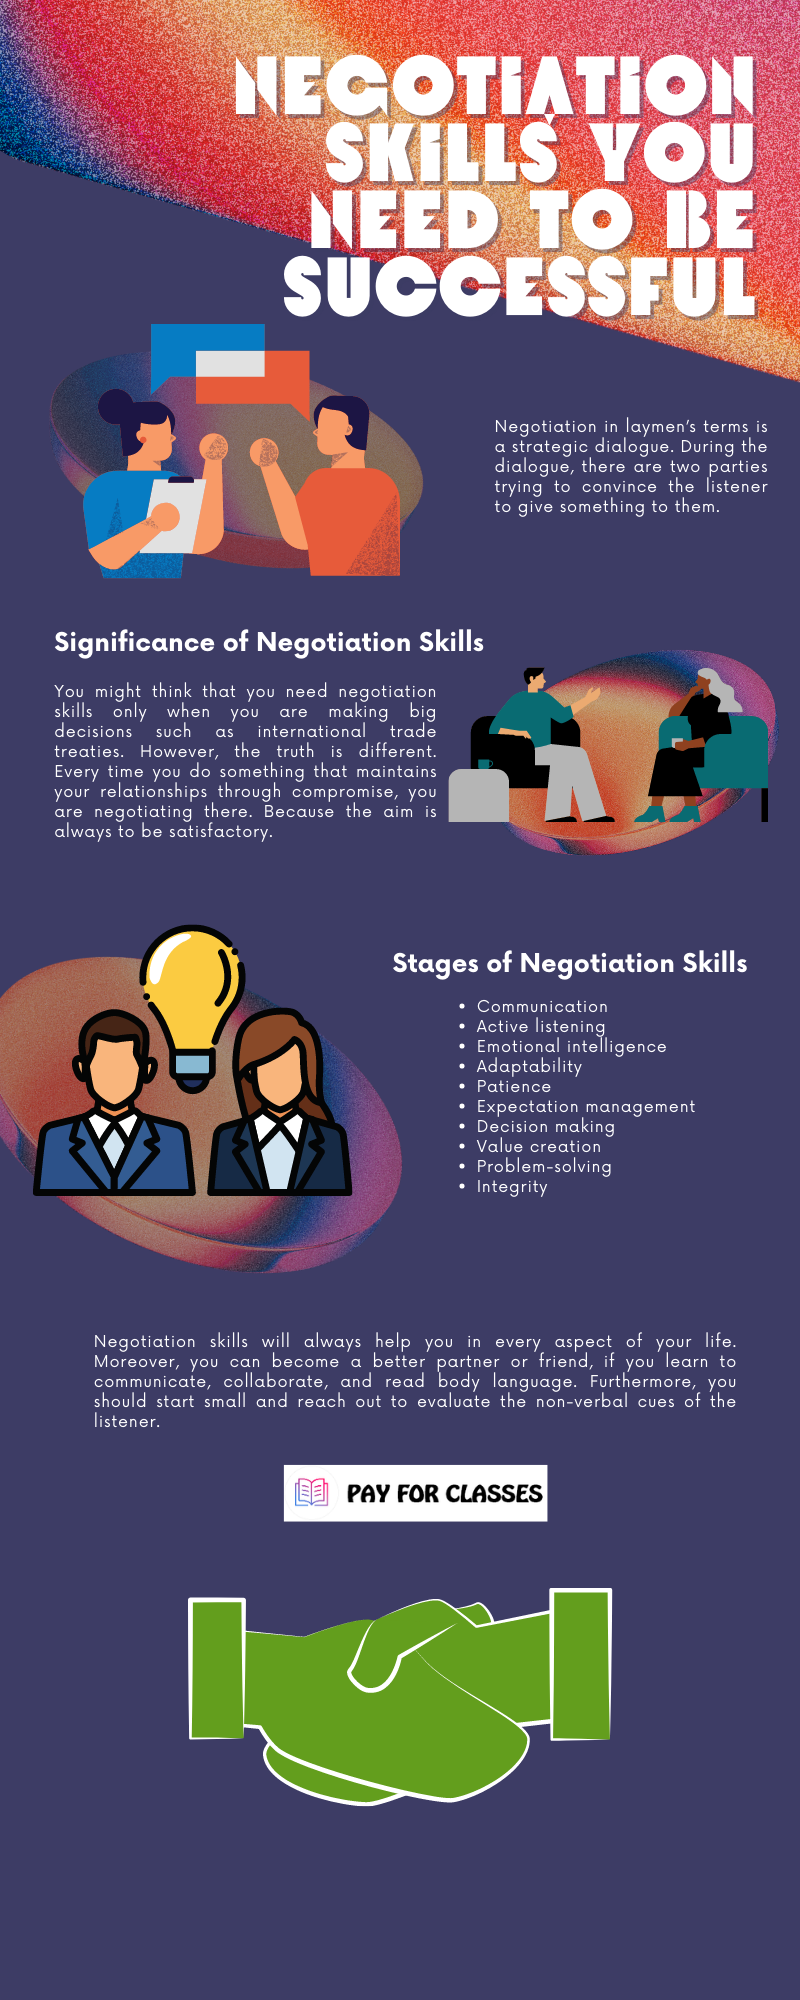 Negotiation-Skills-You-Need-to-Be-Successful-2.png